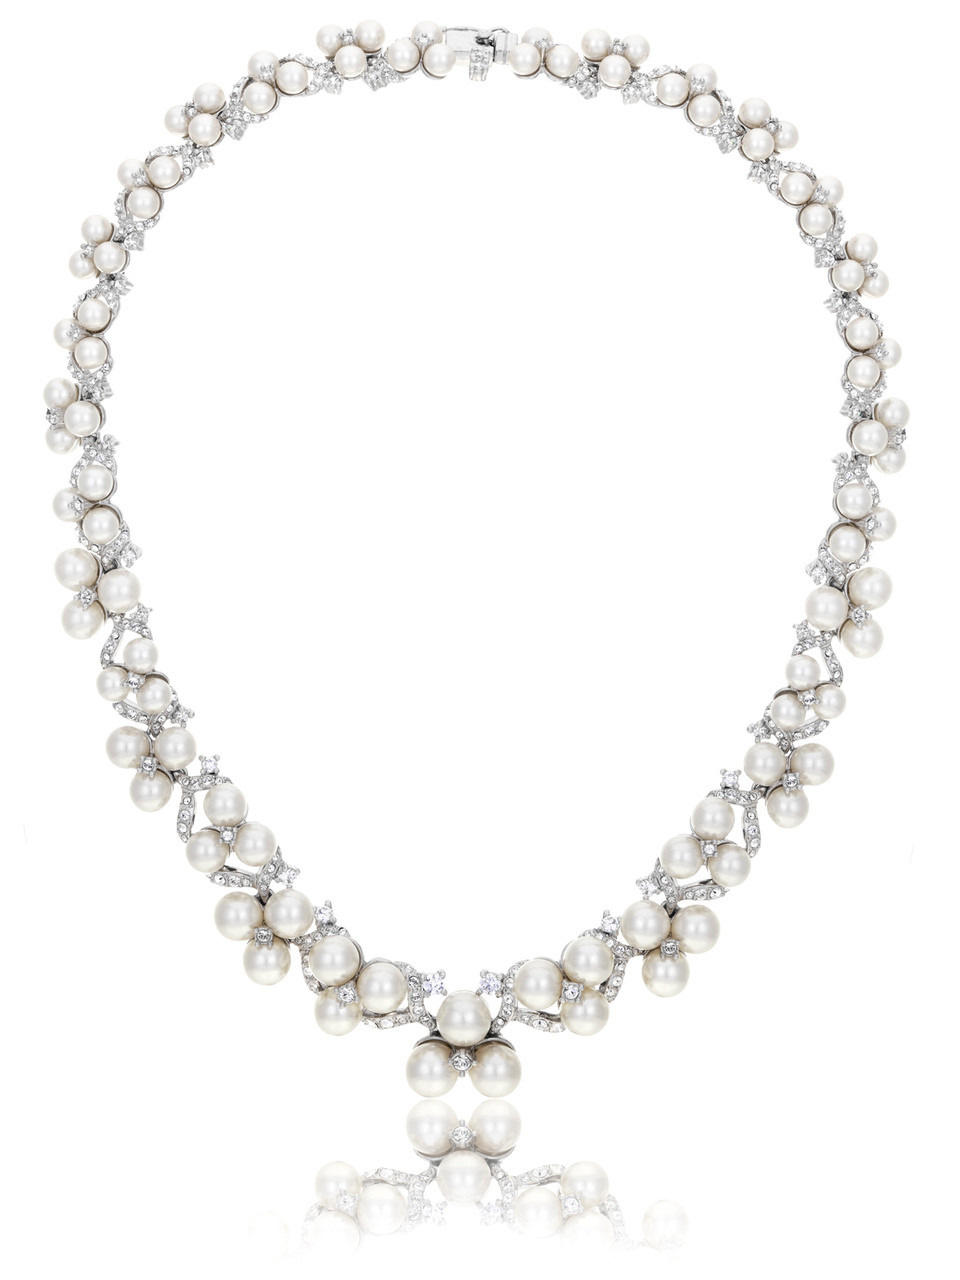 Pearl Cluster Bridal Necklace, Crystal Statement Jewelry & Wedding ...